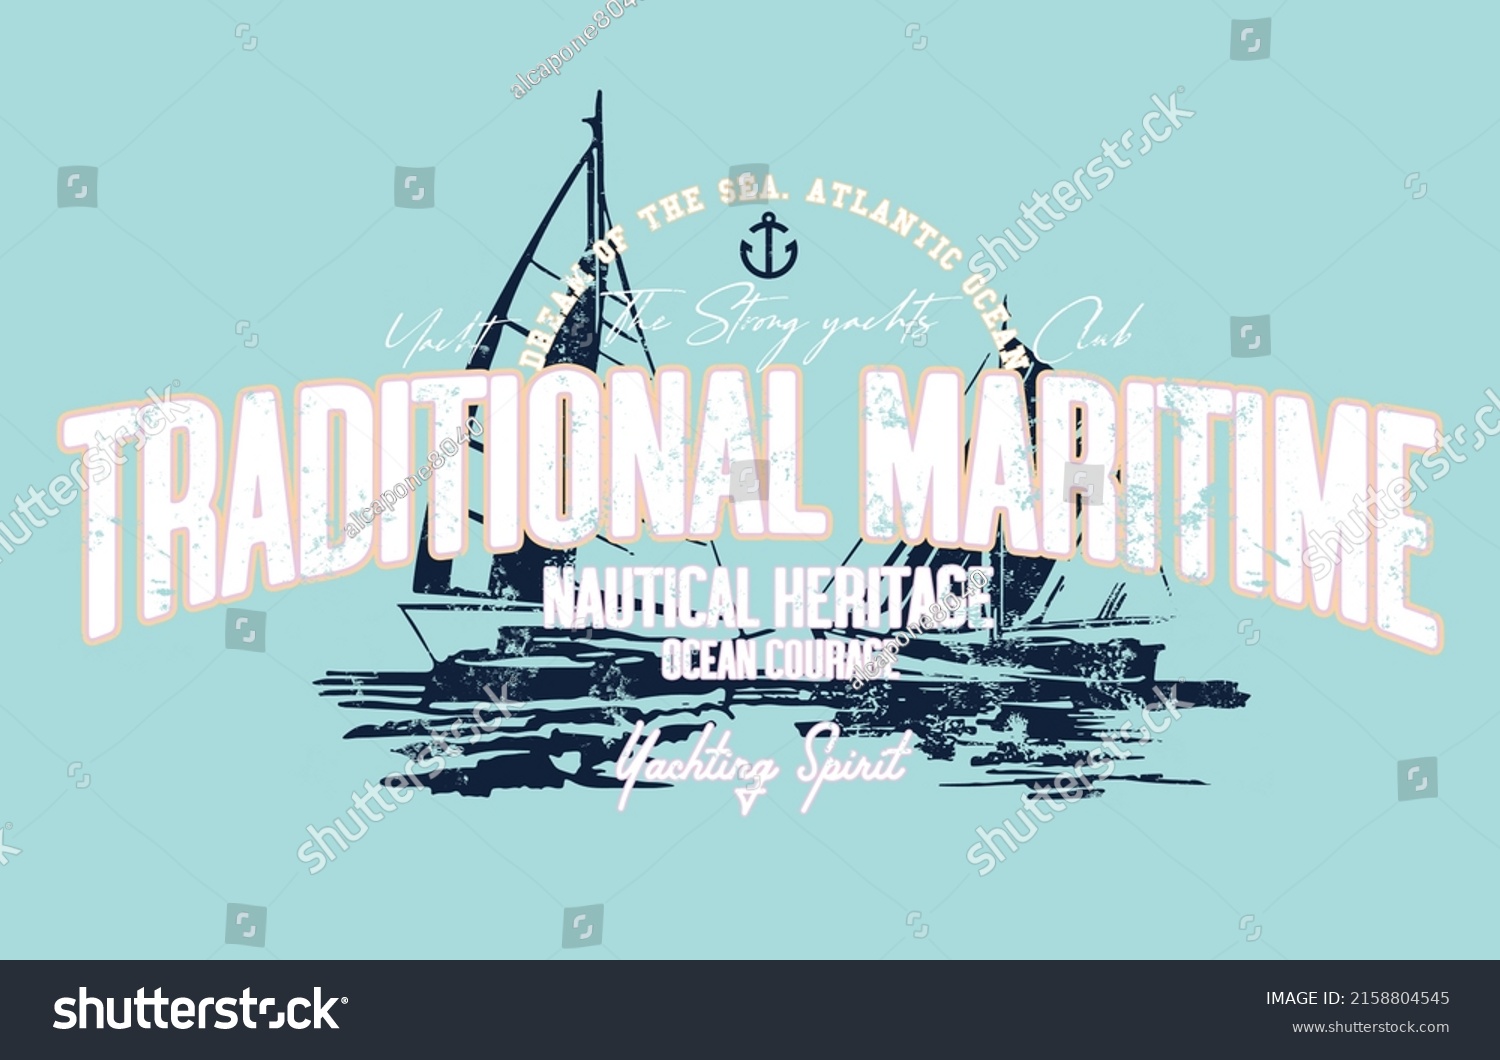 Traditional Maritime Slogan T Shirt Template Stock Vector (Royalty Free ...